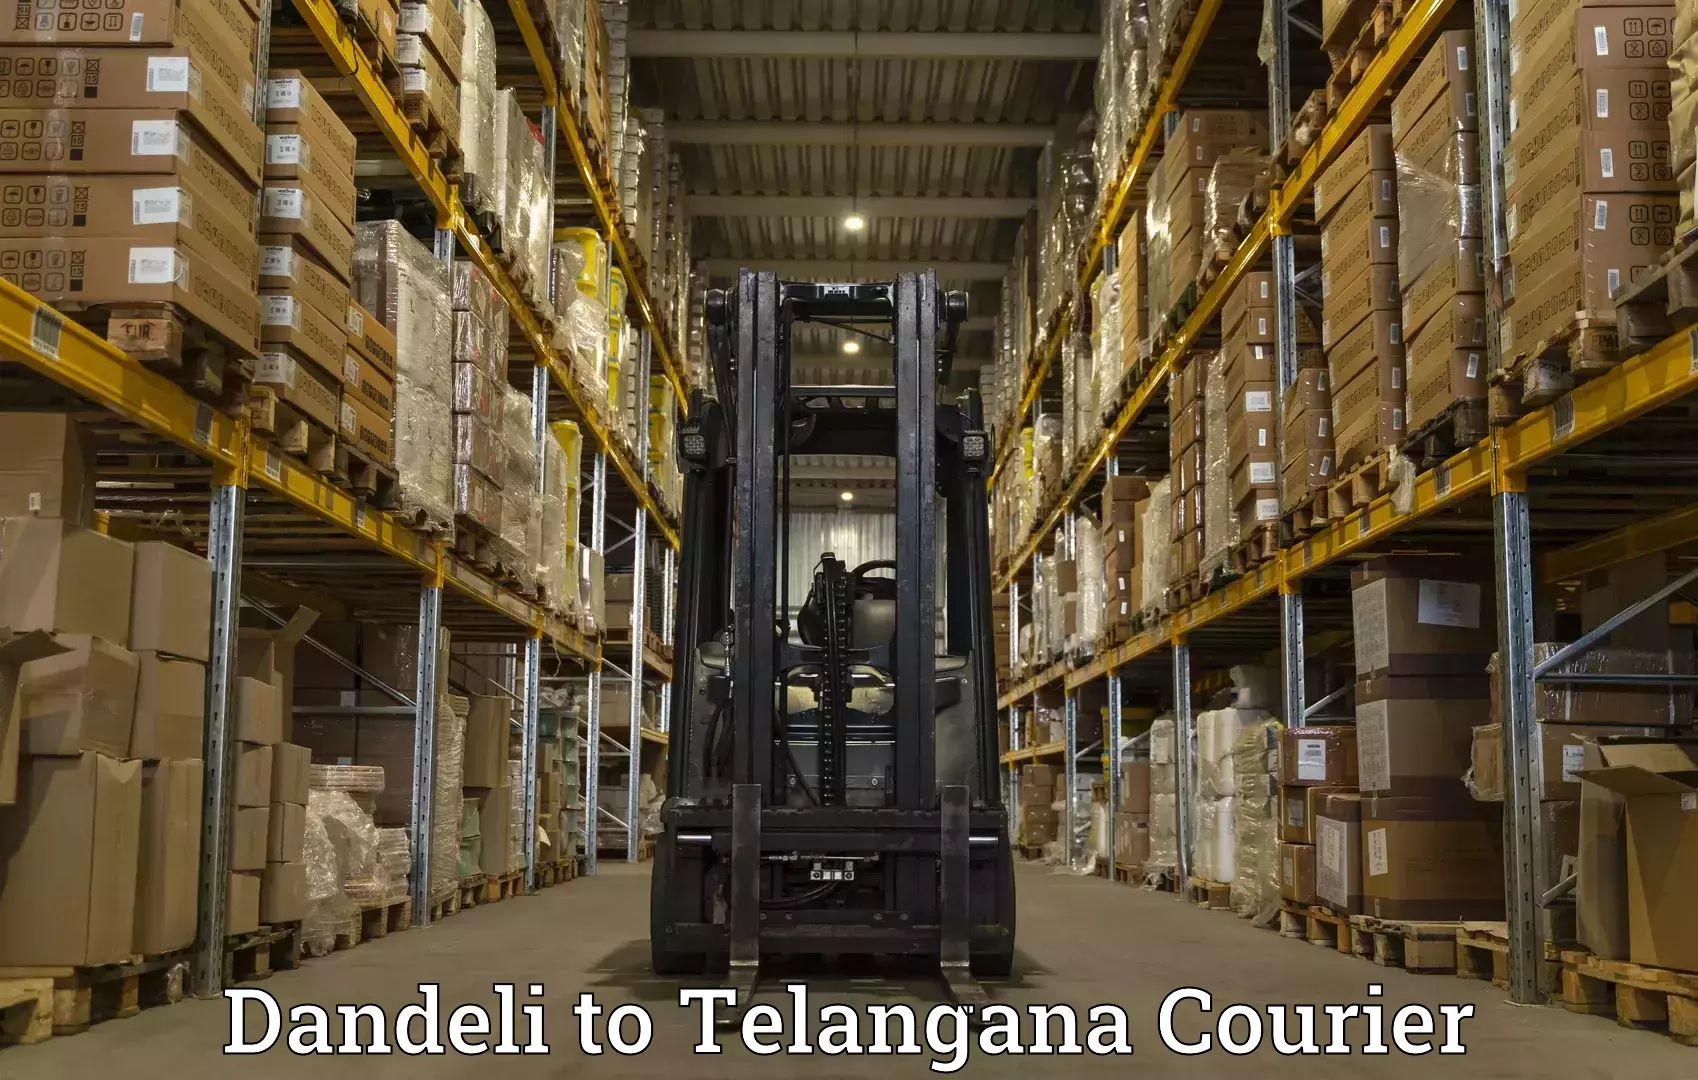 Express delivery network Dandeli to Warangal